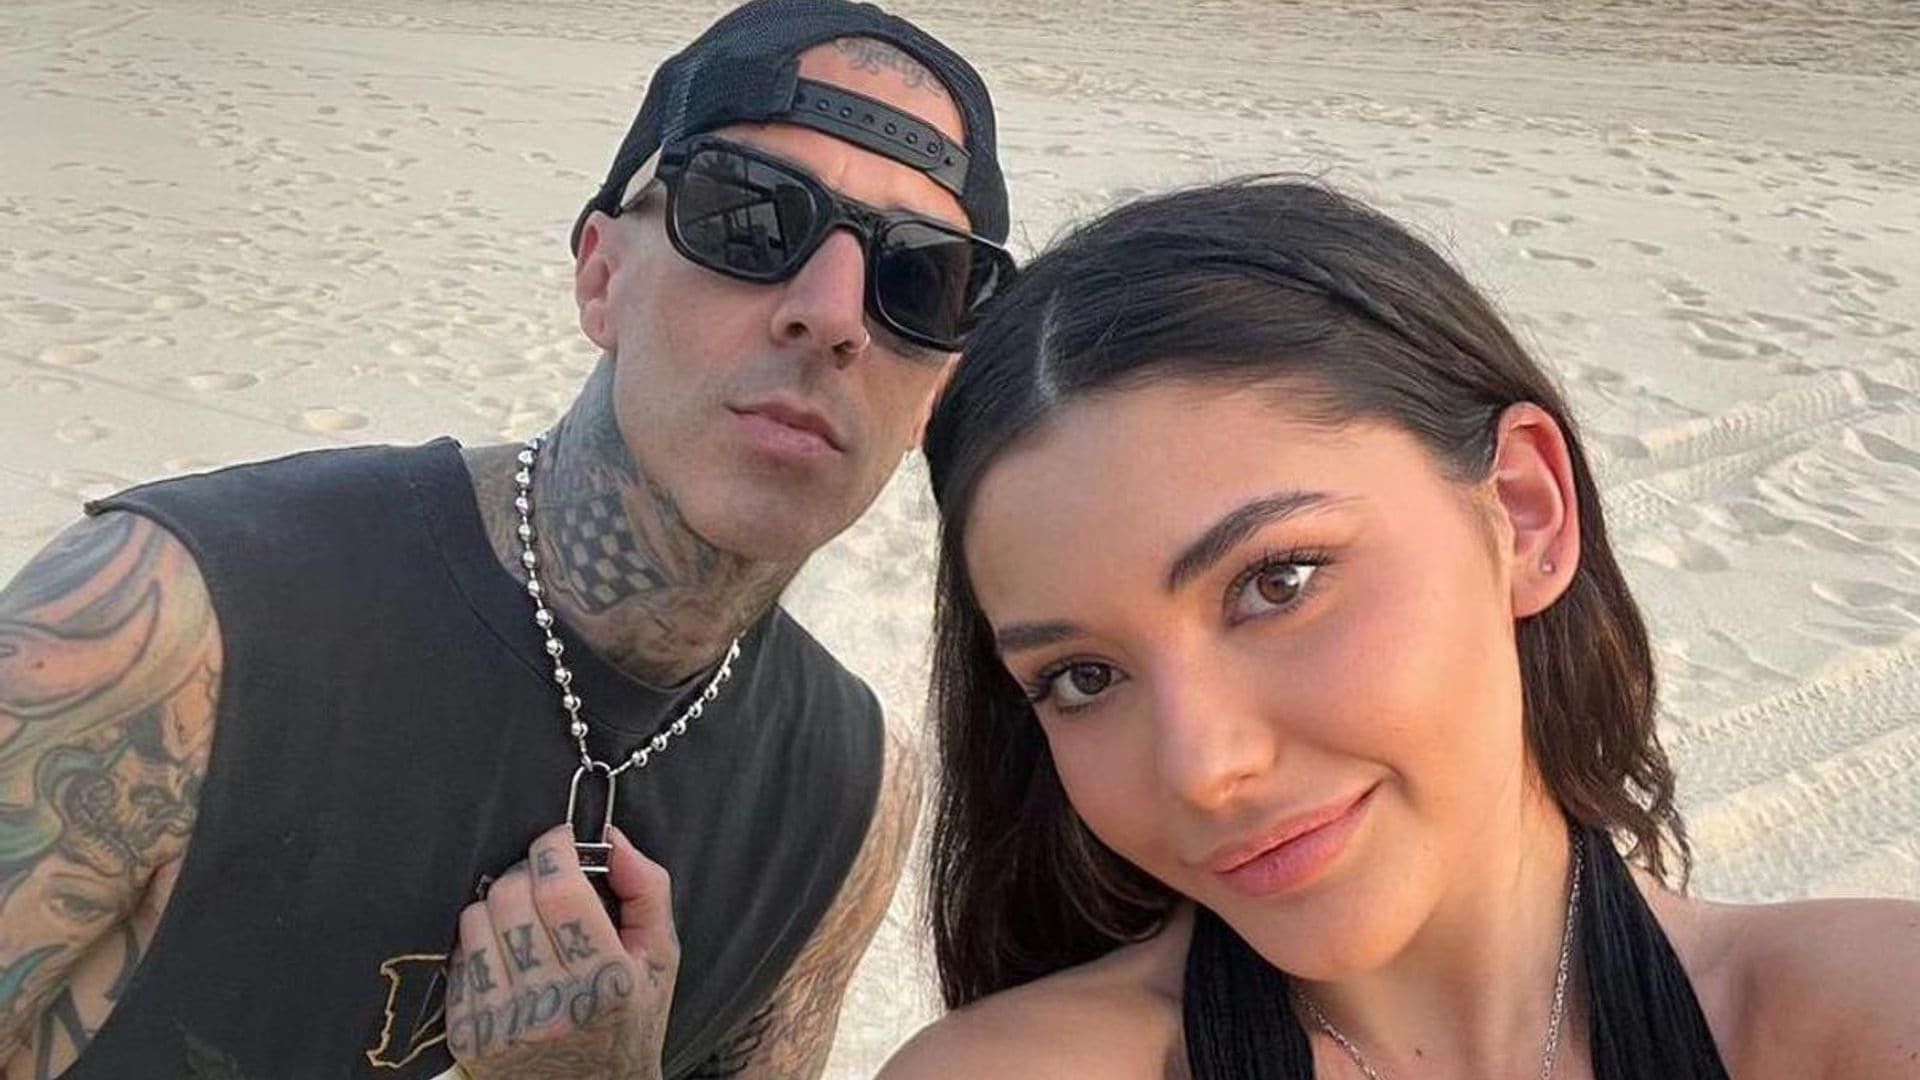 Who is Travis Barker’s stepdaughter Atiana De La Hoya? The 23-year-old Latina is celebrating her birthday